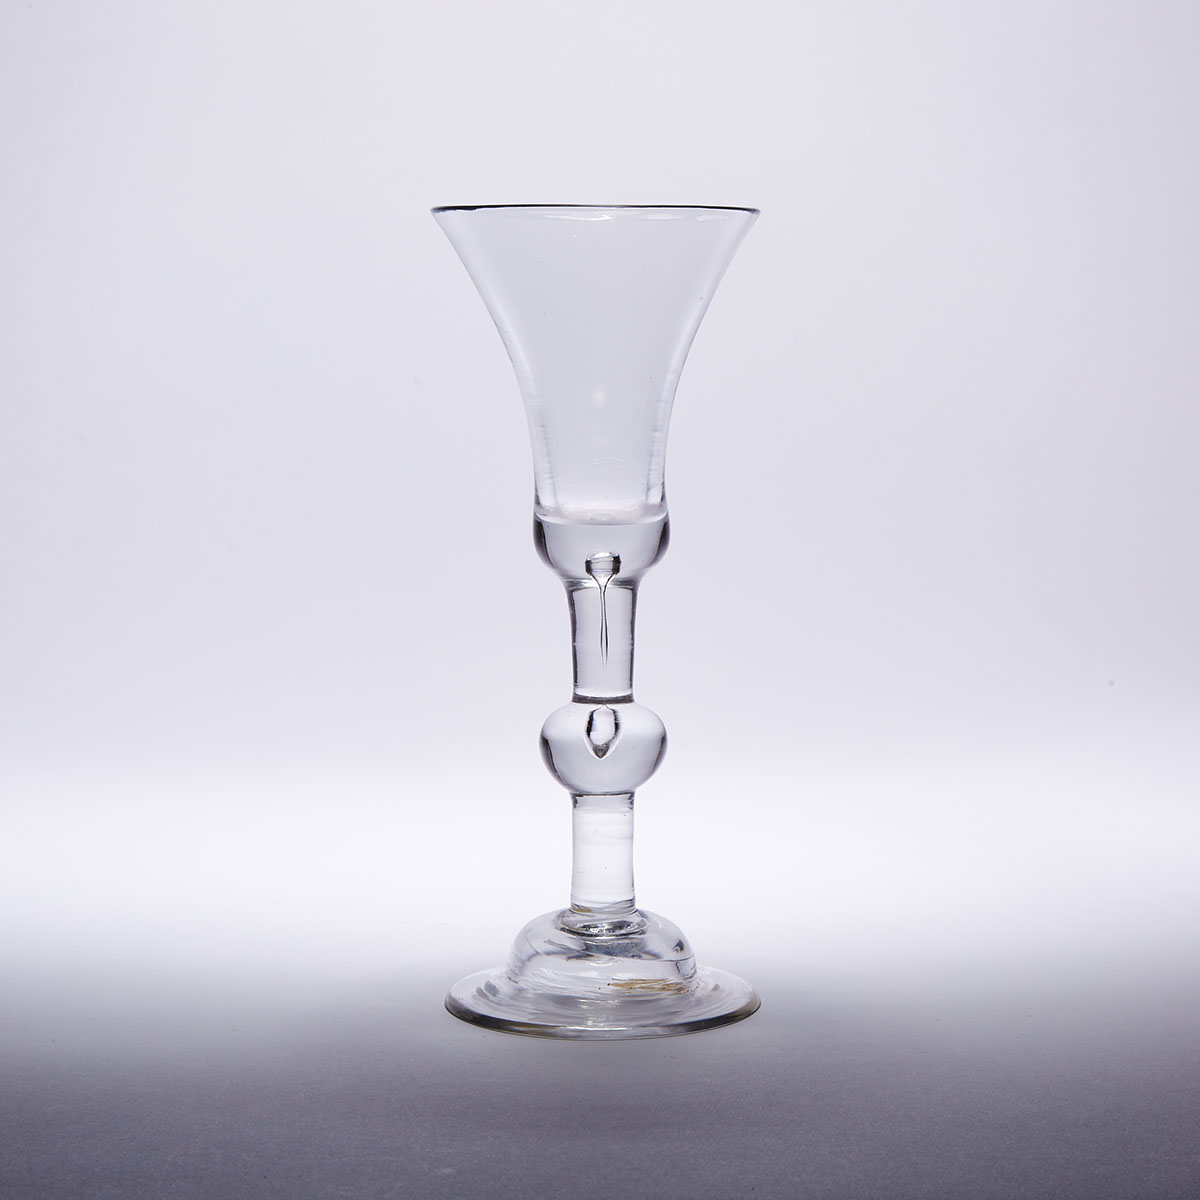 English Teared Knop Stemmed Wine Glass, mid-18th century